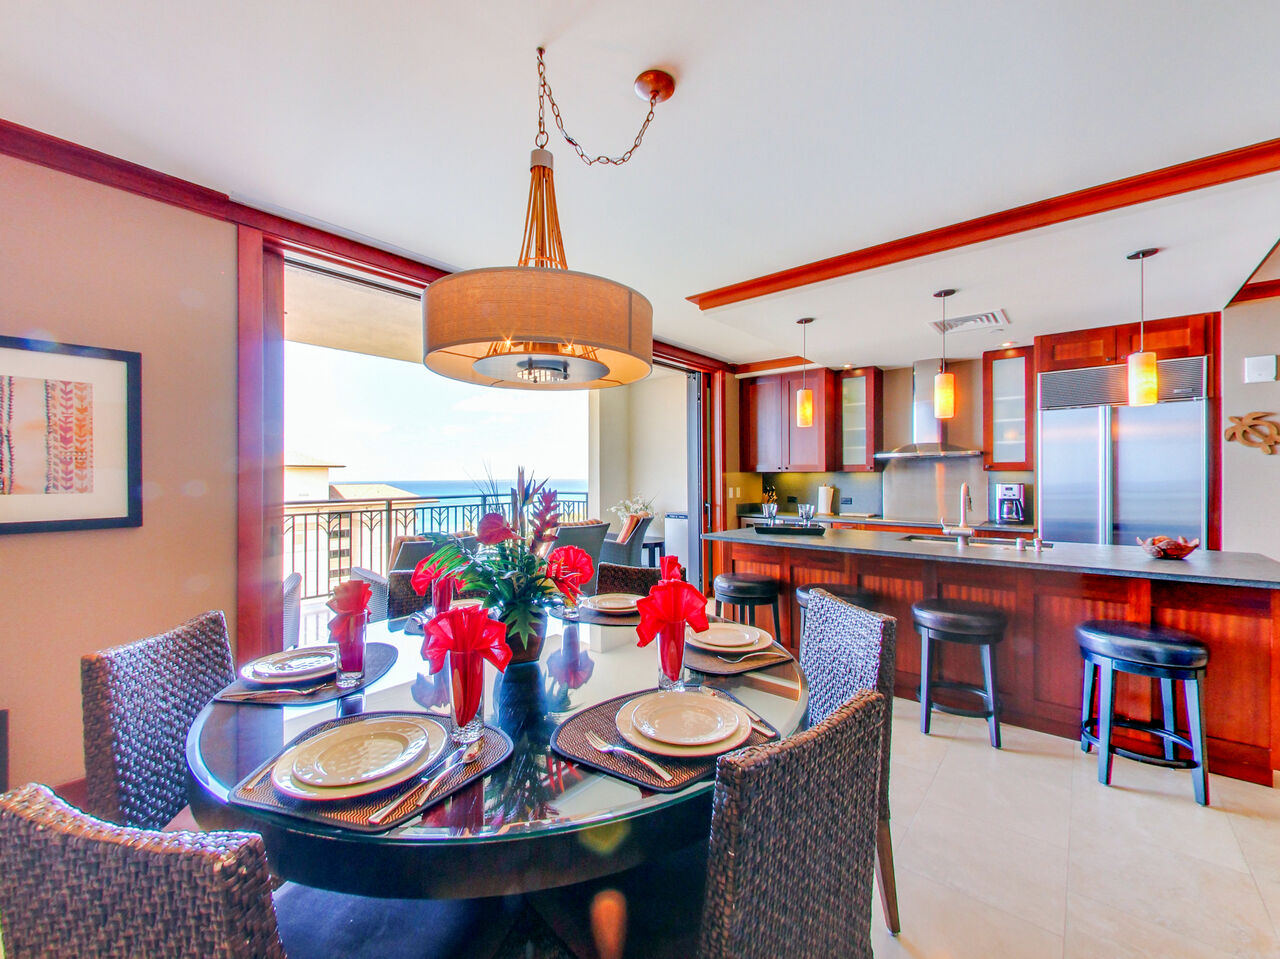 The Kitchen with Ocean View in One of Our Hawaii Vacation Condos.